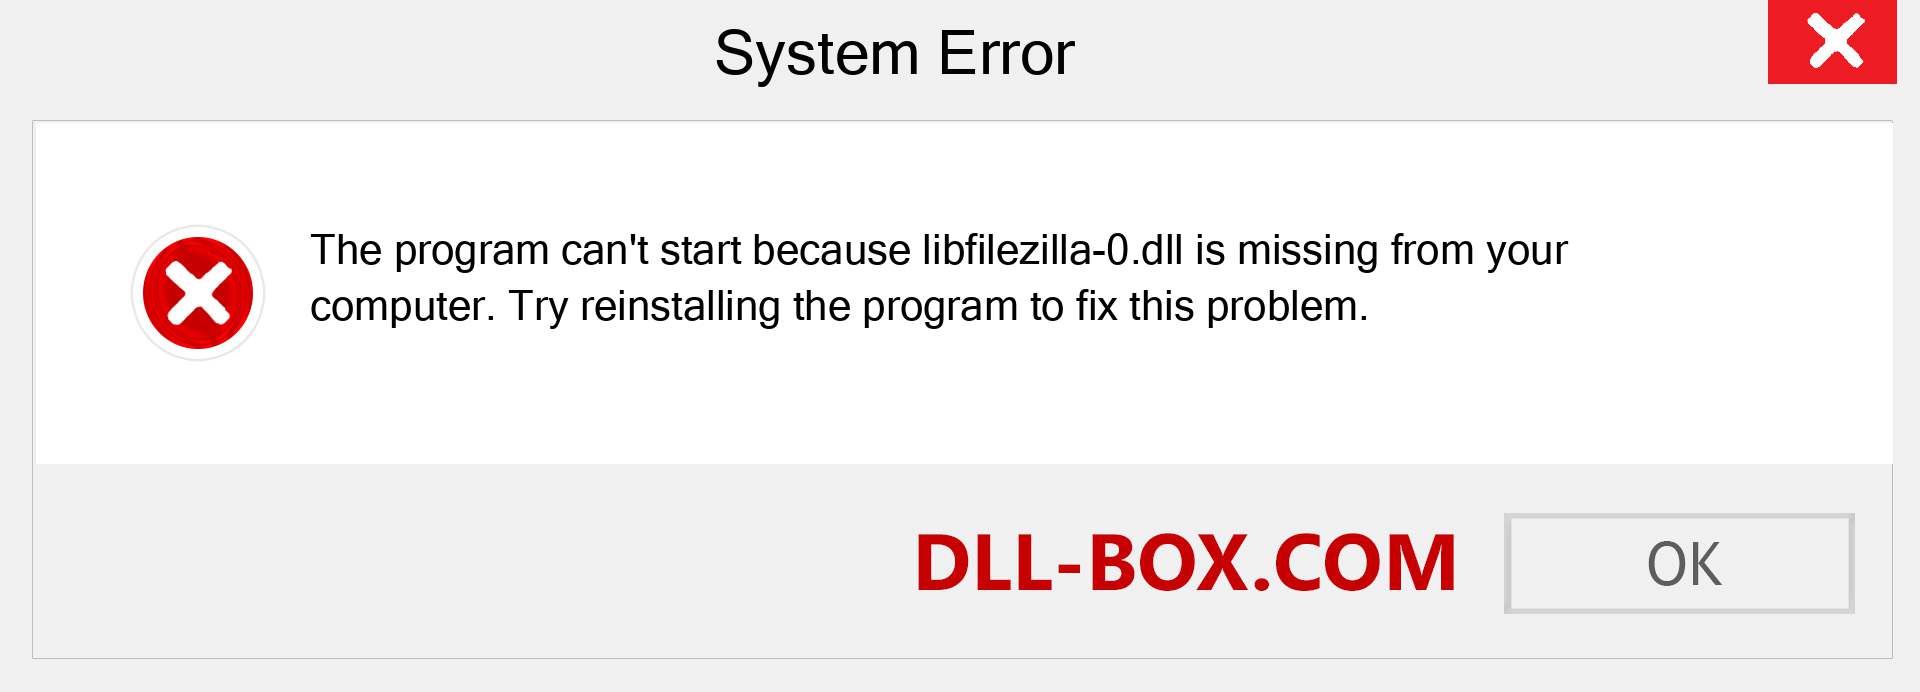  libfilezilla-0.dll file is missing?. Download for Windows 7, 8, 10 - Fix  libfilezilla-0 dll Missing Error on Windows, photos, images